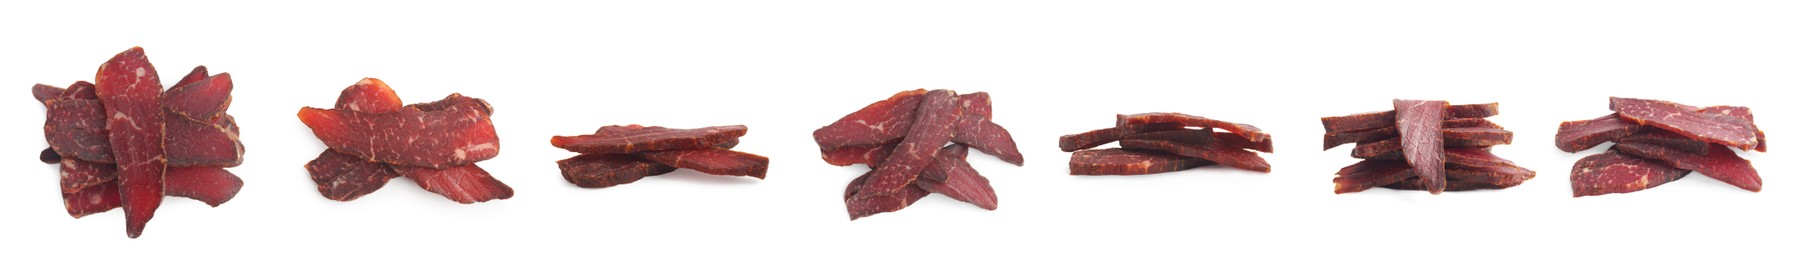 Set with delicious beef jerky on white background, banner design